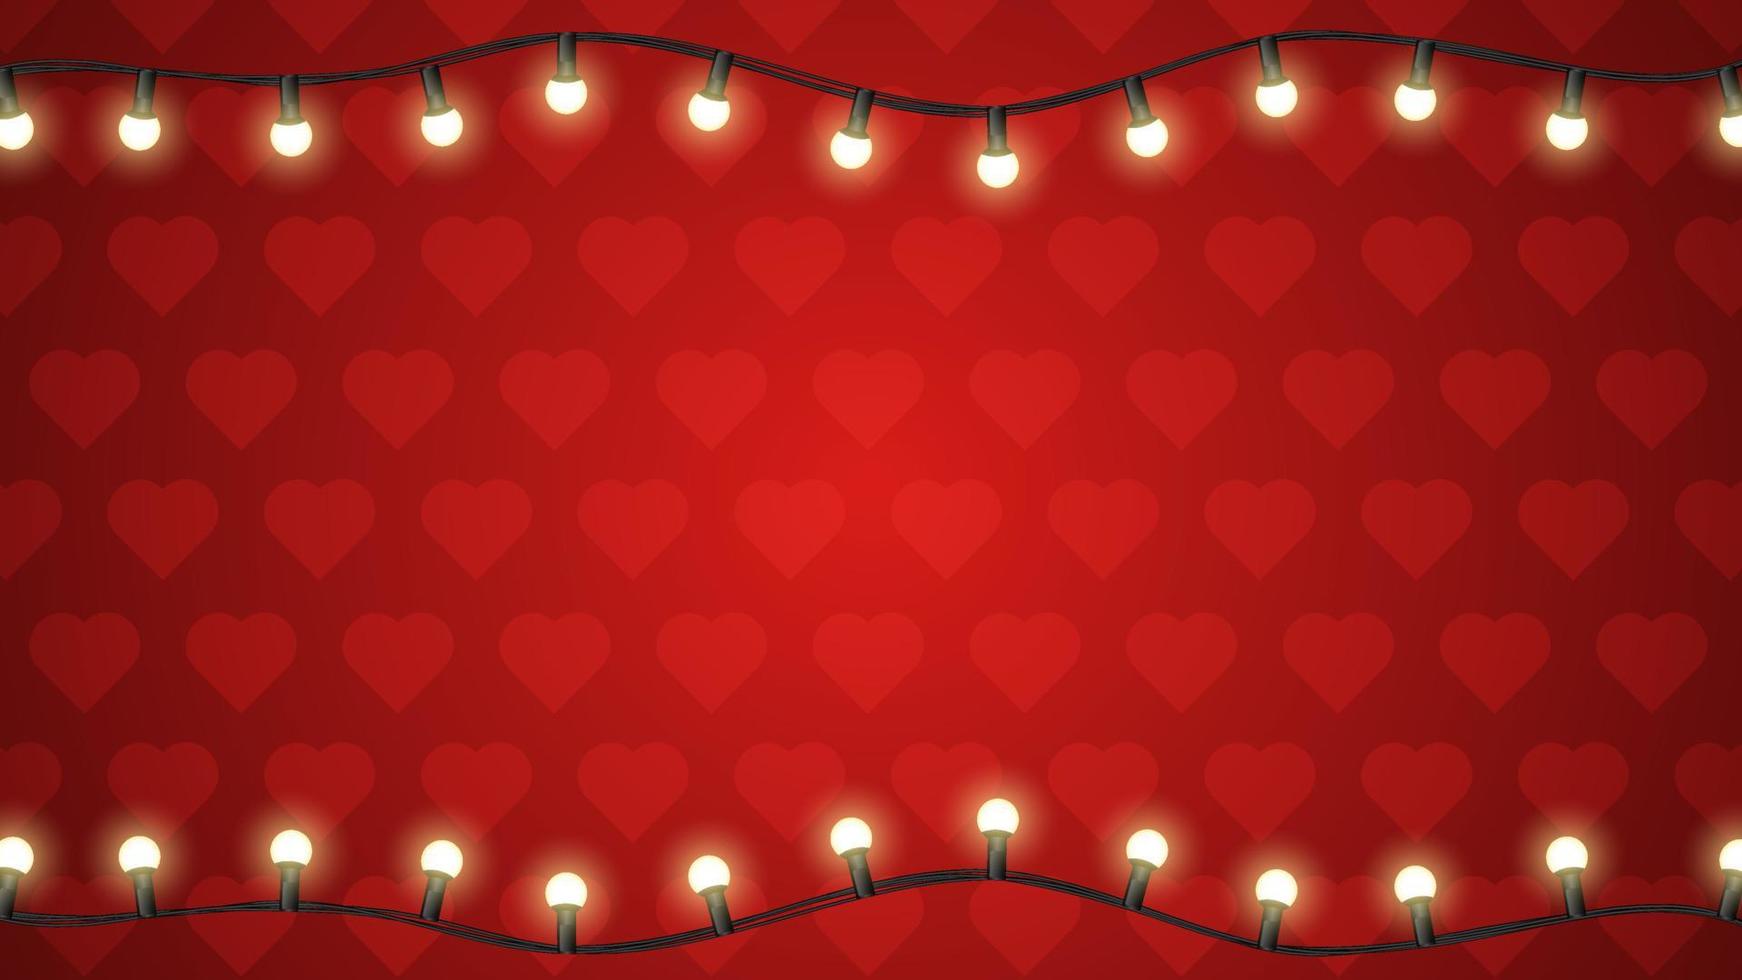 Red background with hearts and glowing garland vector